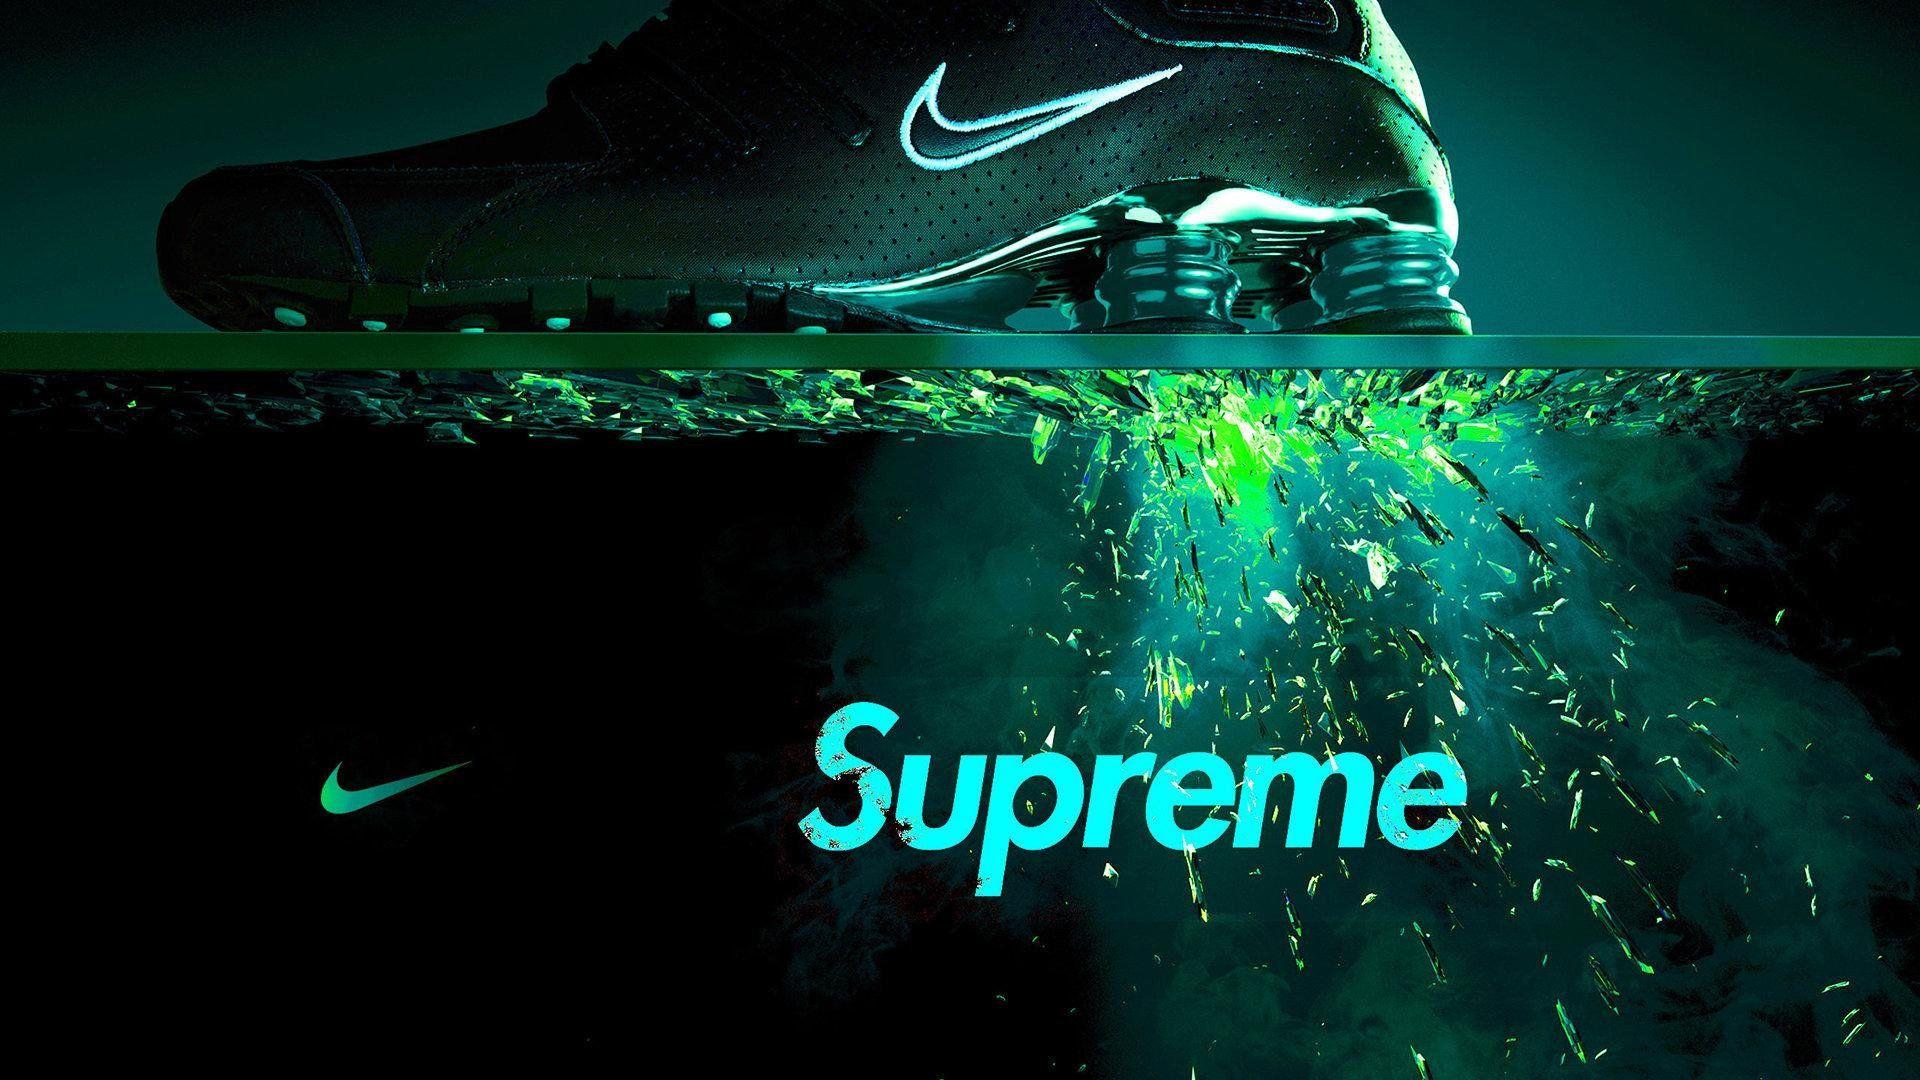 Nike Supreme Wallpaper for Phone and HD Desktop Background